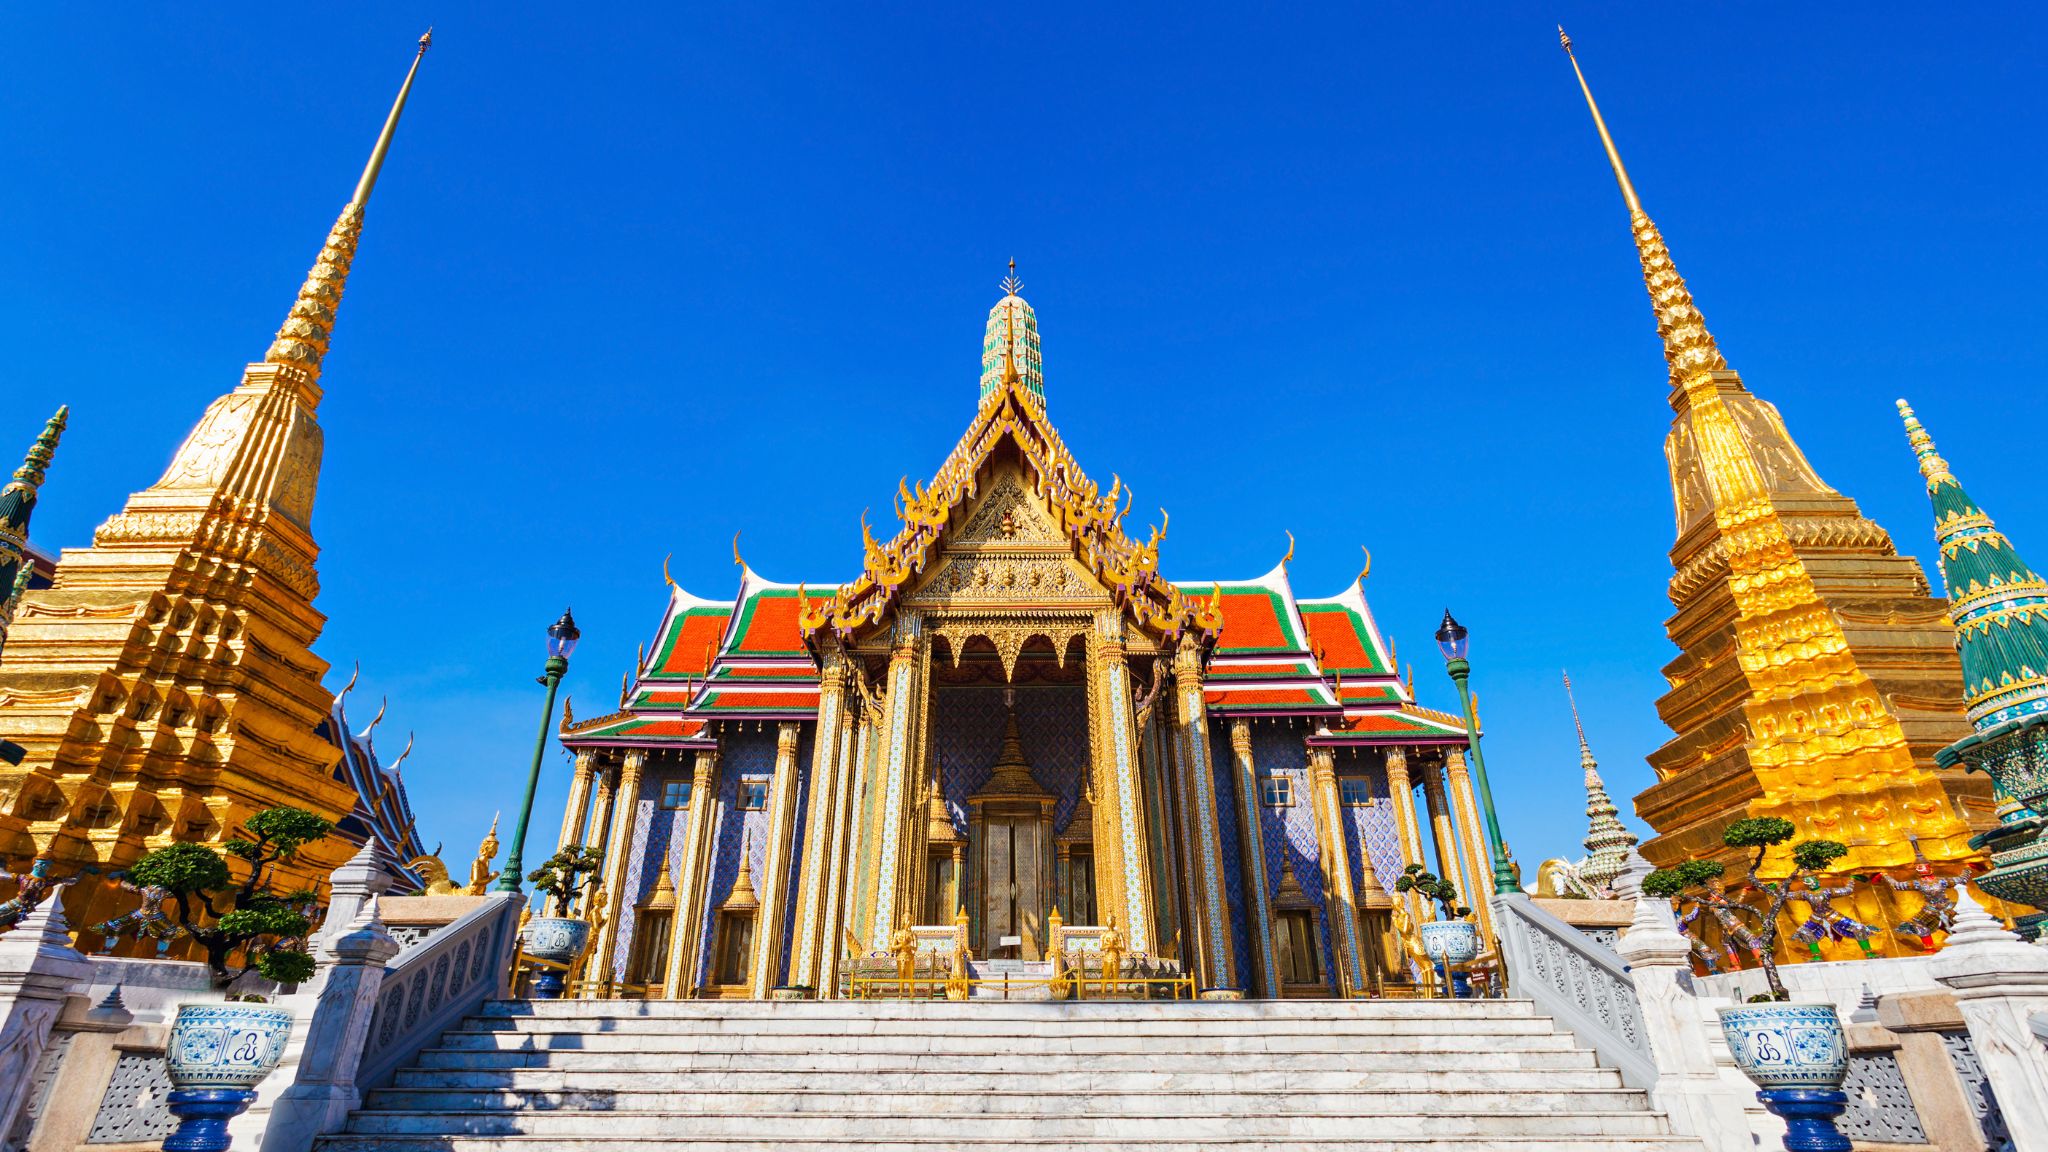 Day 14 Learn About Thailand Culture In Wat Phra Kaew